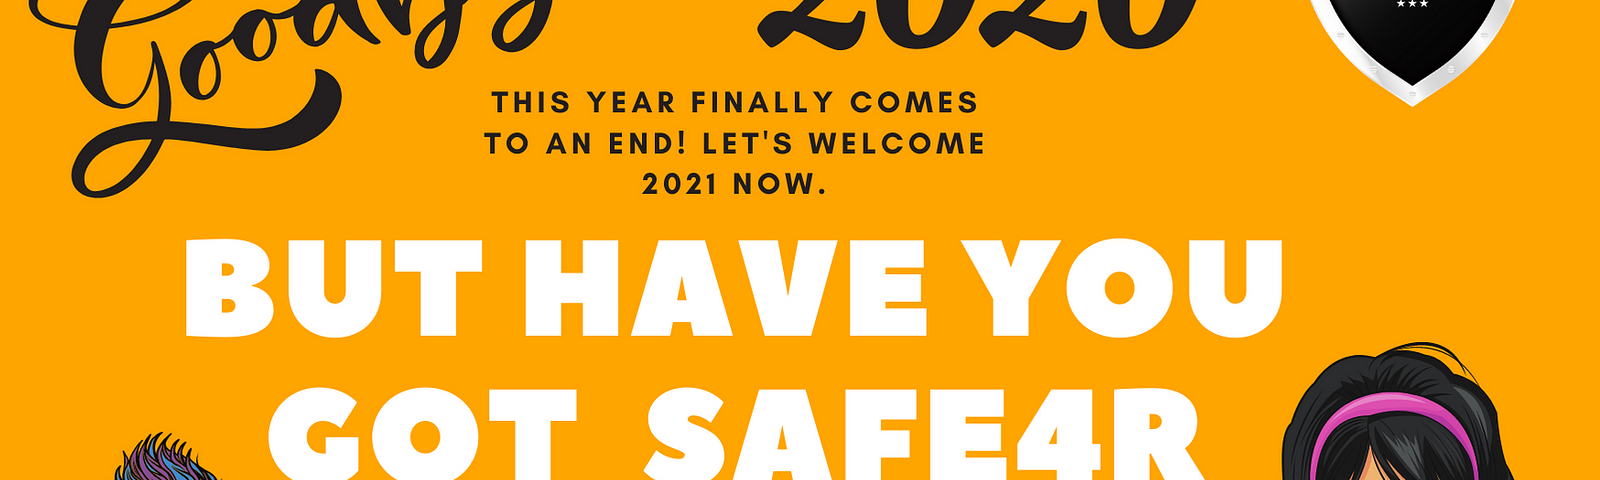 Get the best personal safety app of the year 2020, SAFE4R here — https://www.onelink.to/safe4r